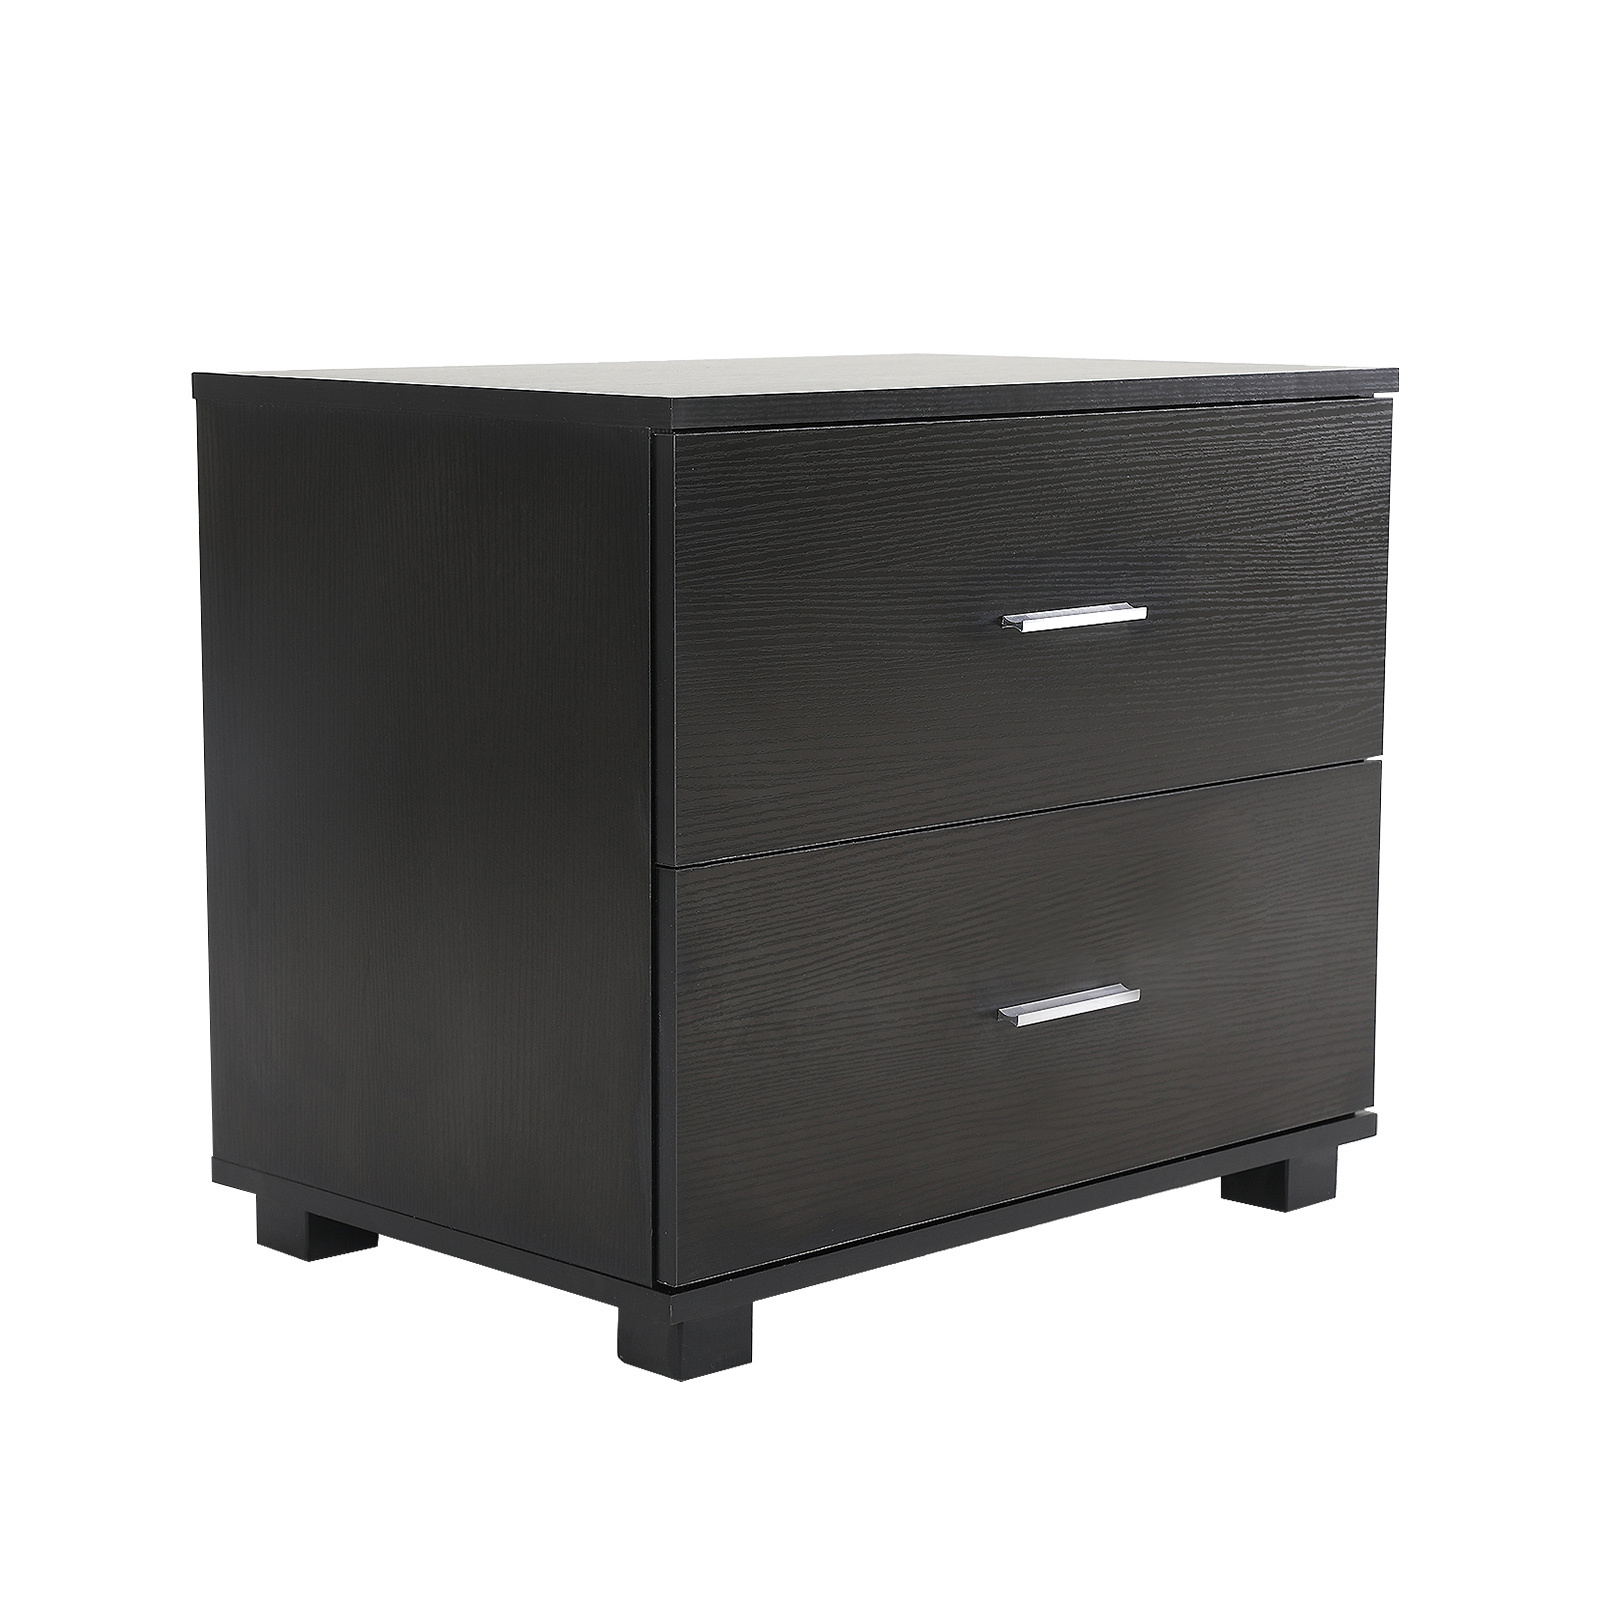 Bedside Tables 2 Drawer With Legs ETTA - BLACK